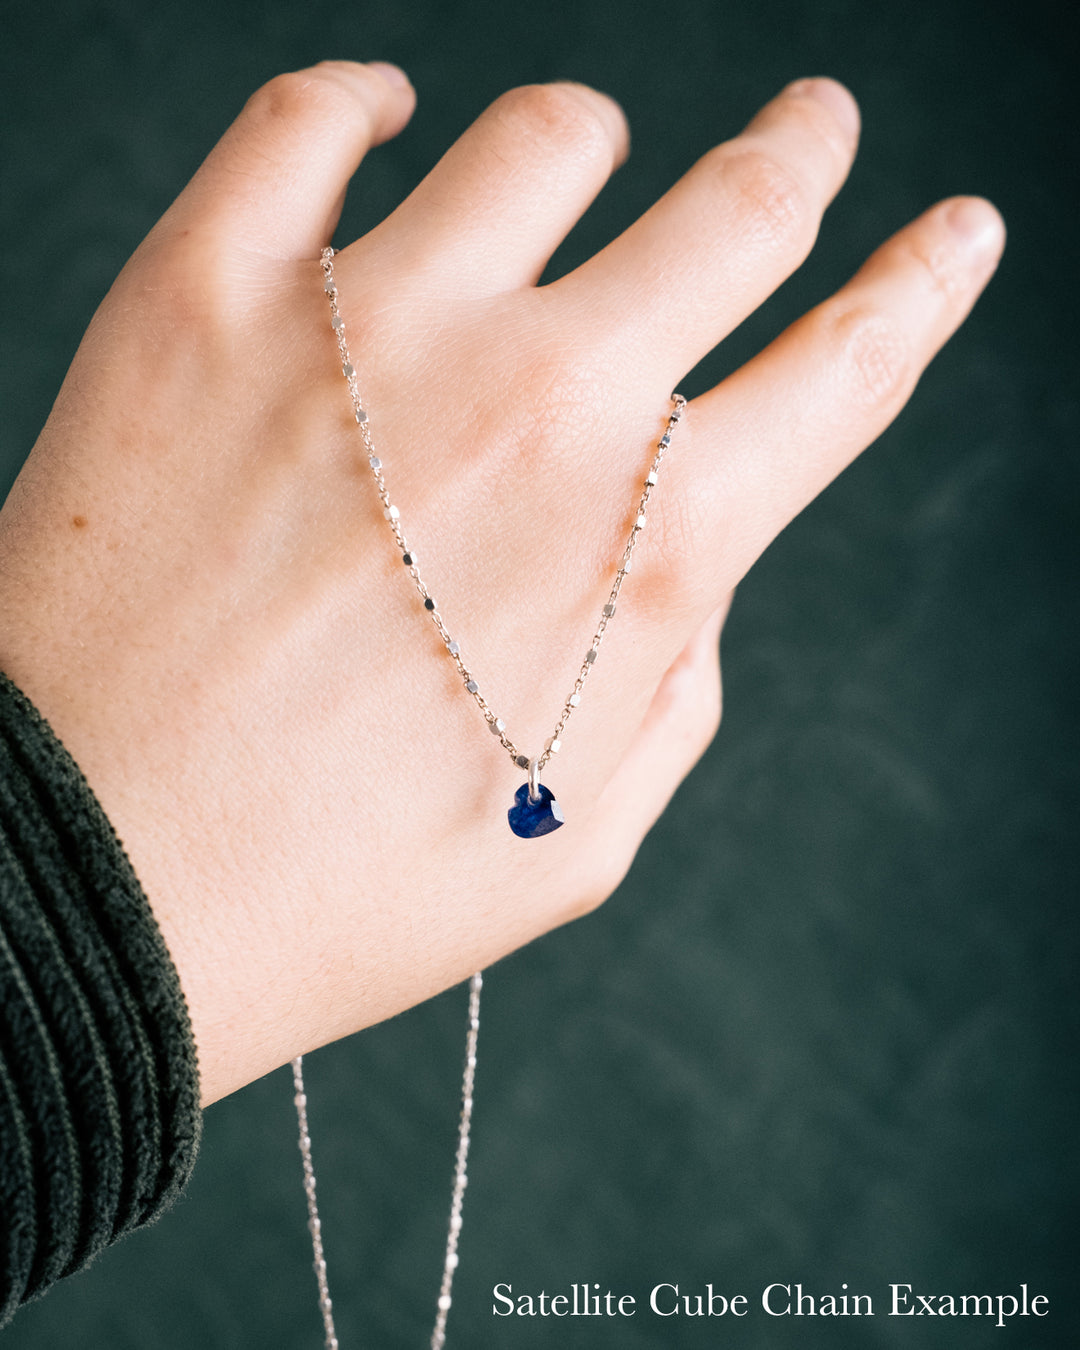 Mini Blue Sapphire Heart Necklace - The Healing Pear